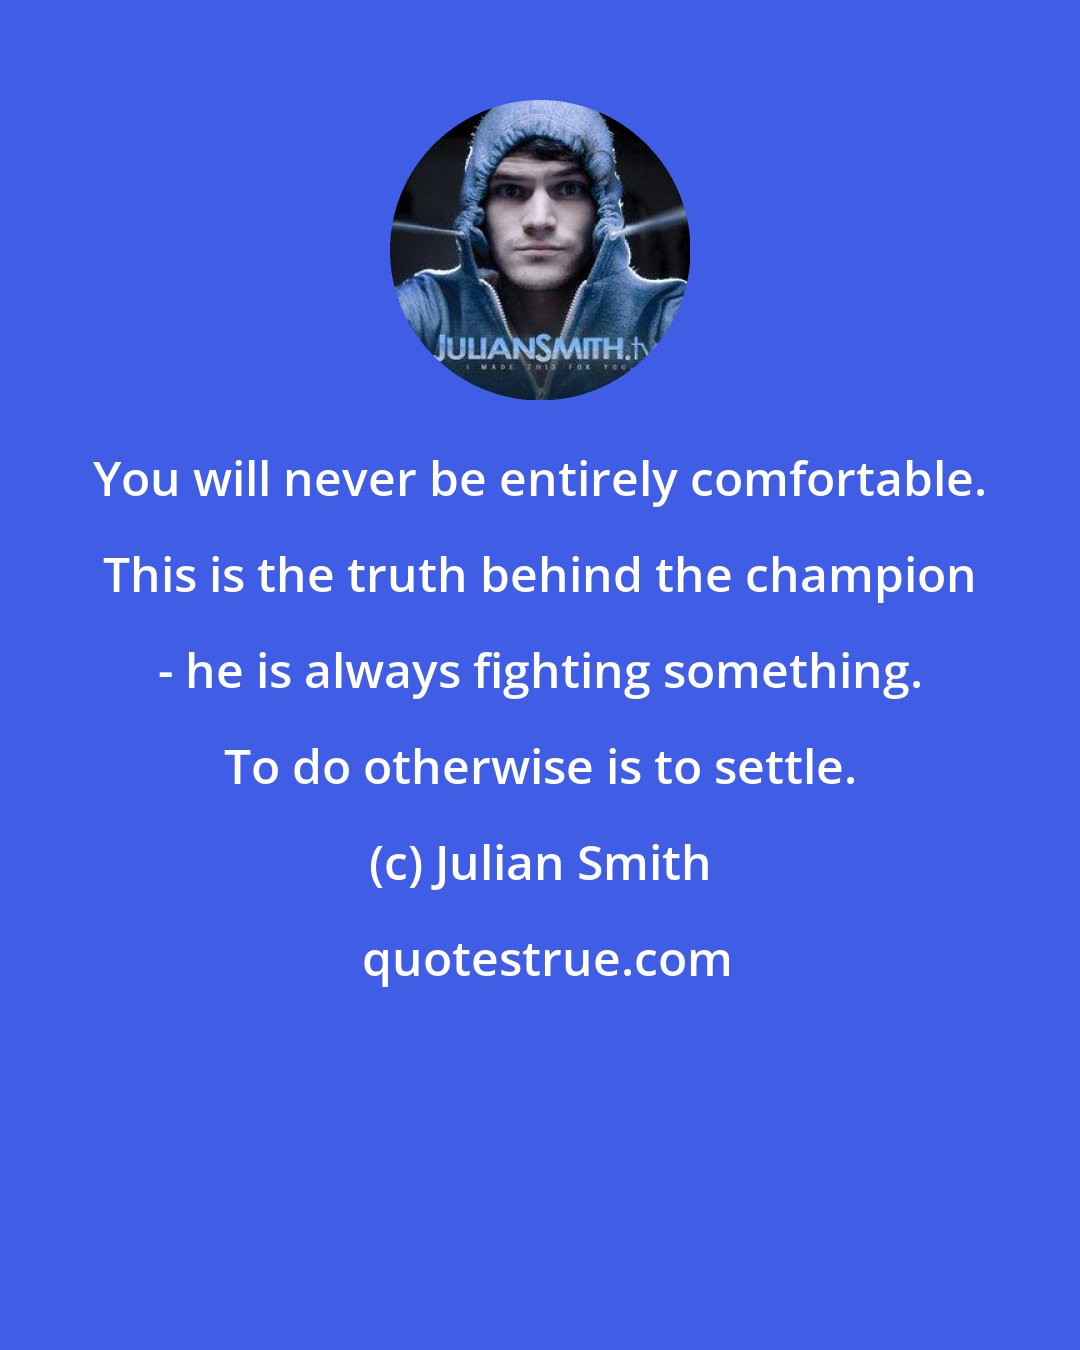 Julian Smith: You will never be entirely comfortable. This is the truth behind the champion - he is always fighting something. To do otherwise is to settle.